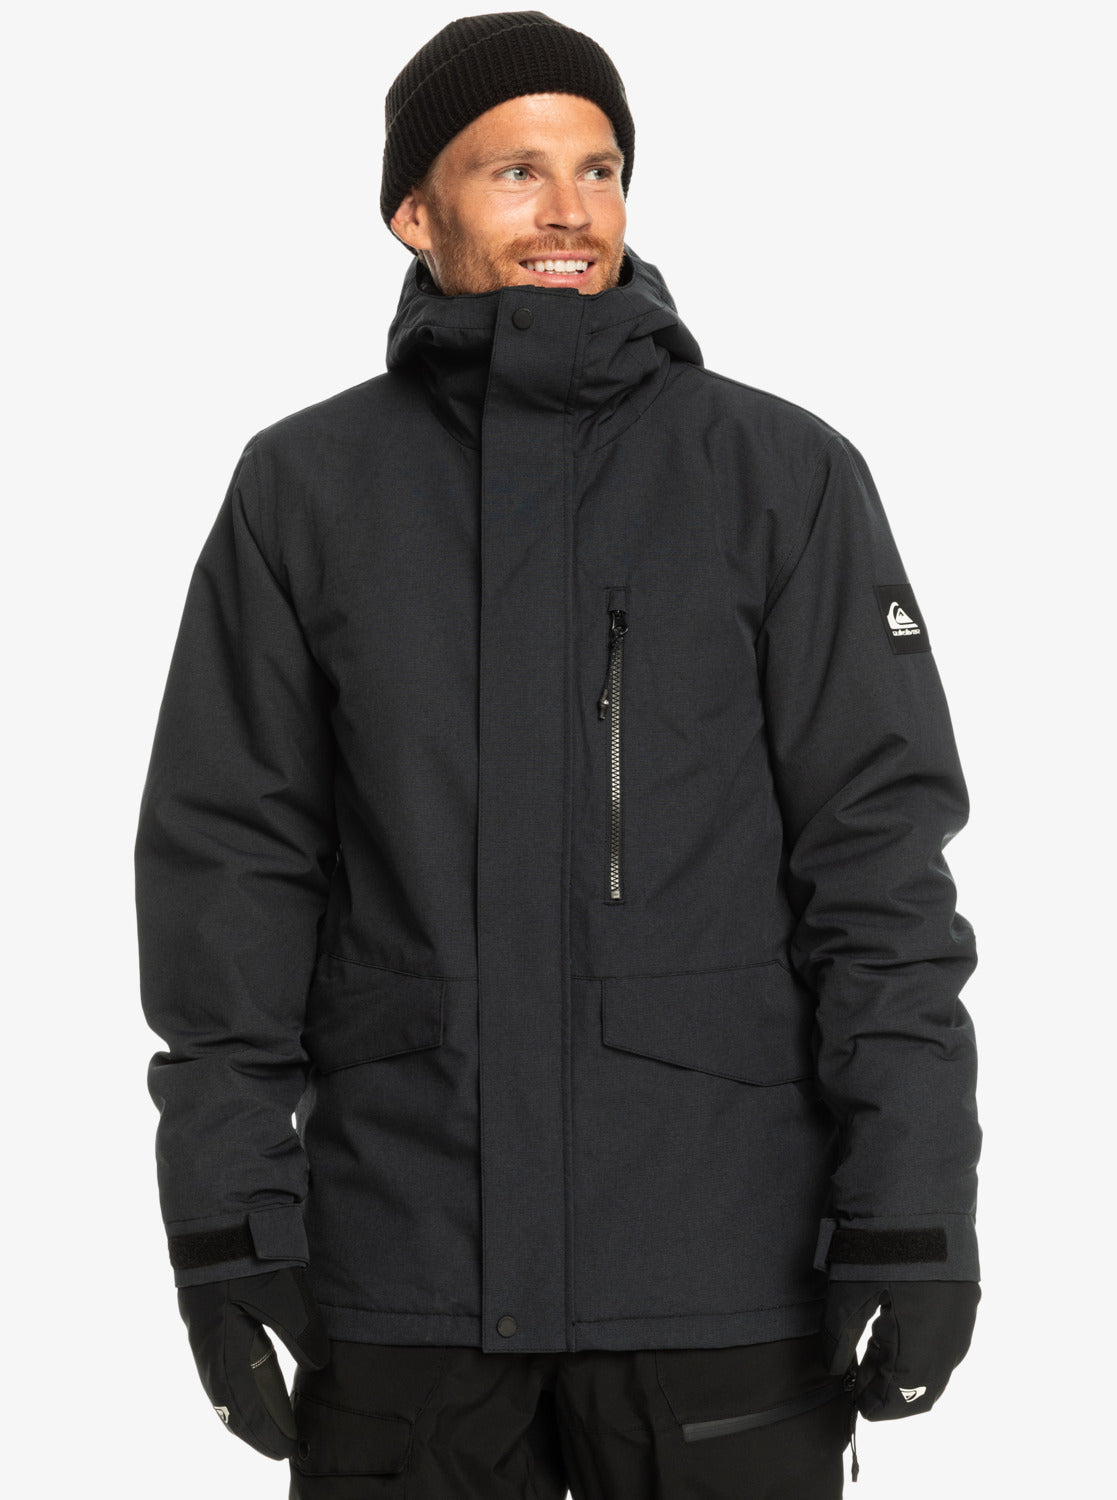 Quiksilver Mission Solid Insulated Snow Jacket - True Black